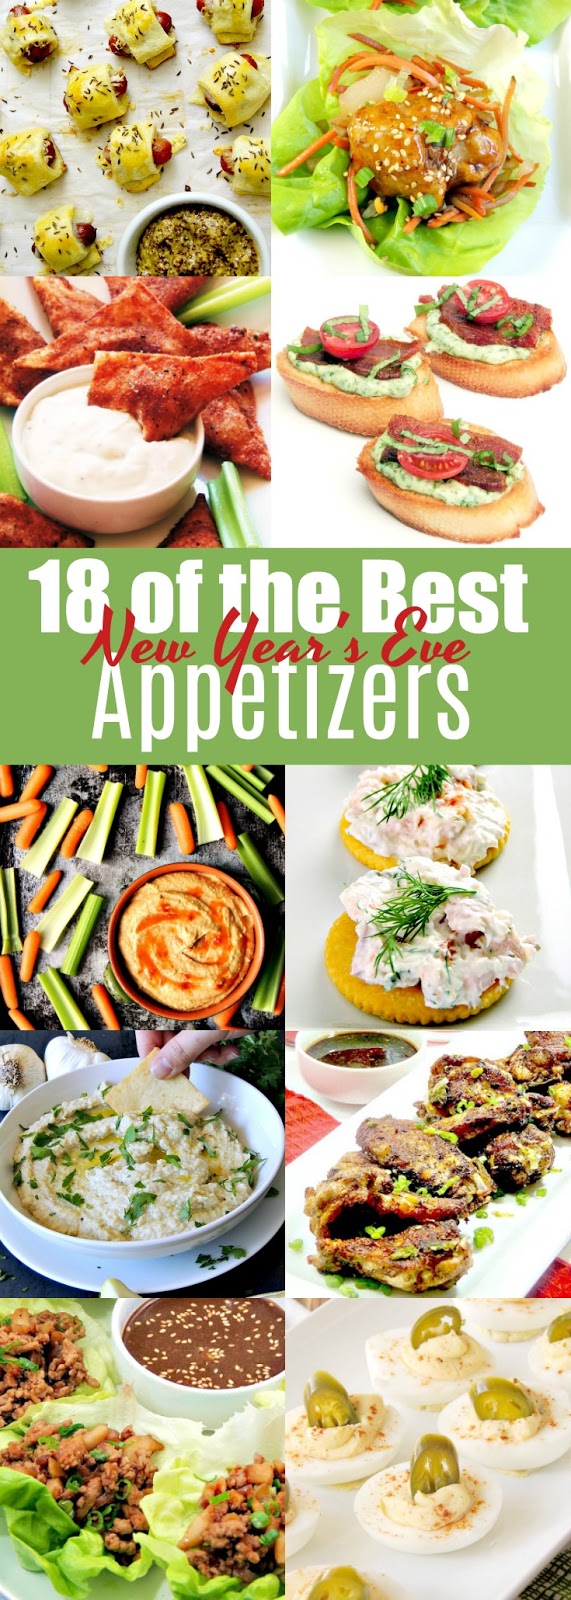 18 of the best appetizers for New Year's Eve! From www.bobbiskozykitchen